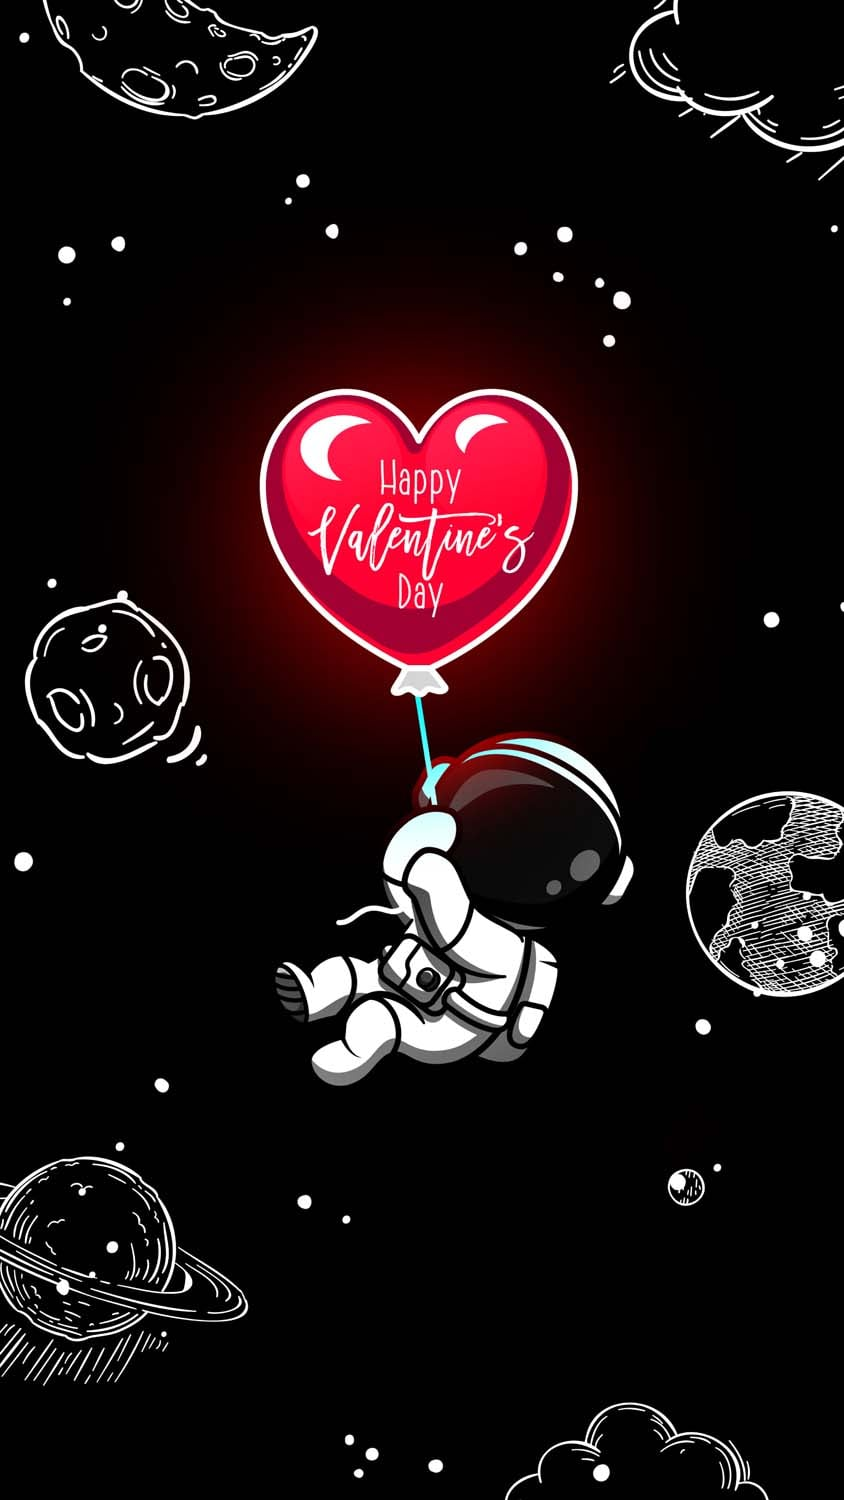 Happy Valentines Day From Space IPhone Wallpaper HD  IPhone Wallpapers